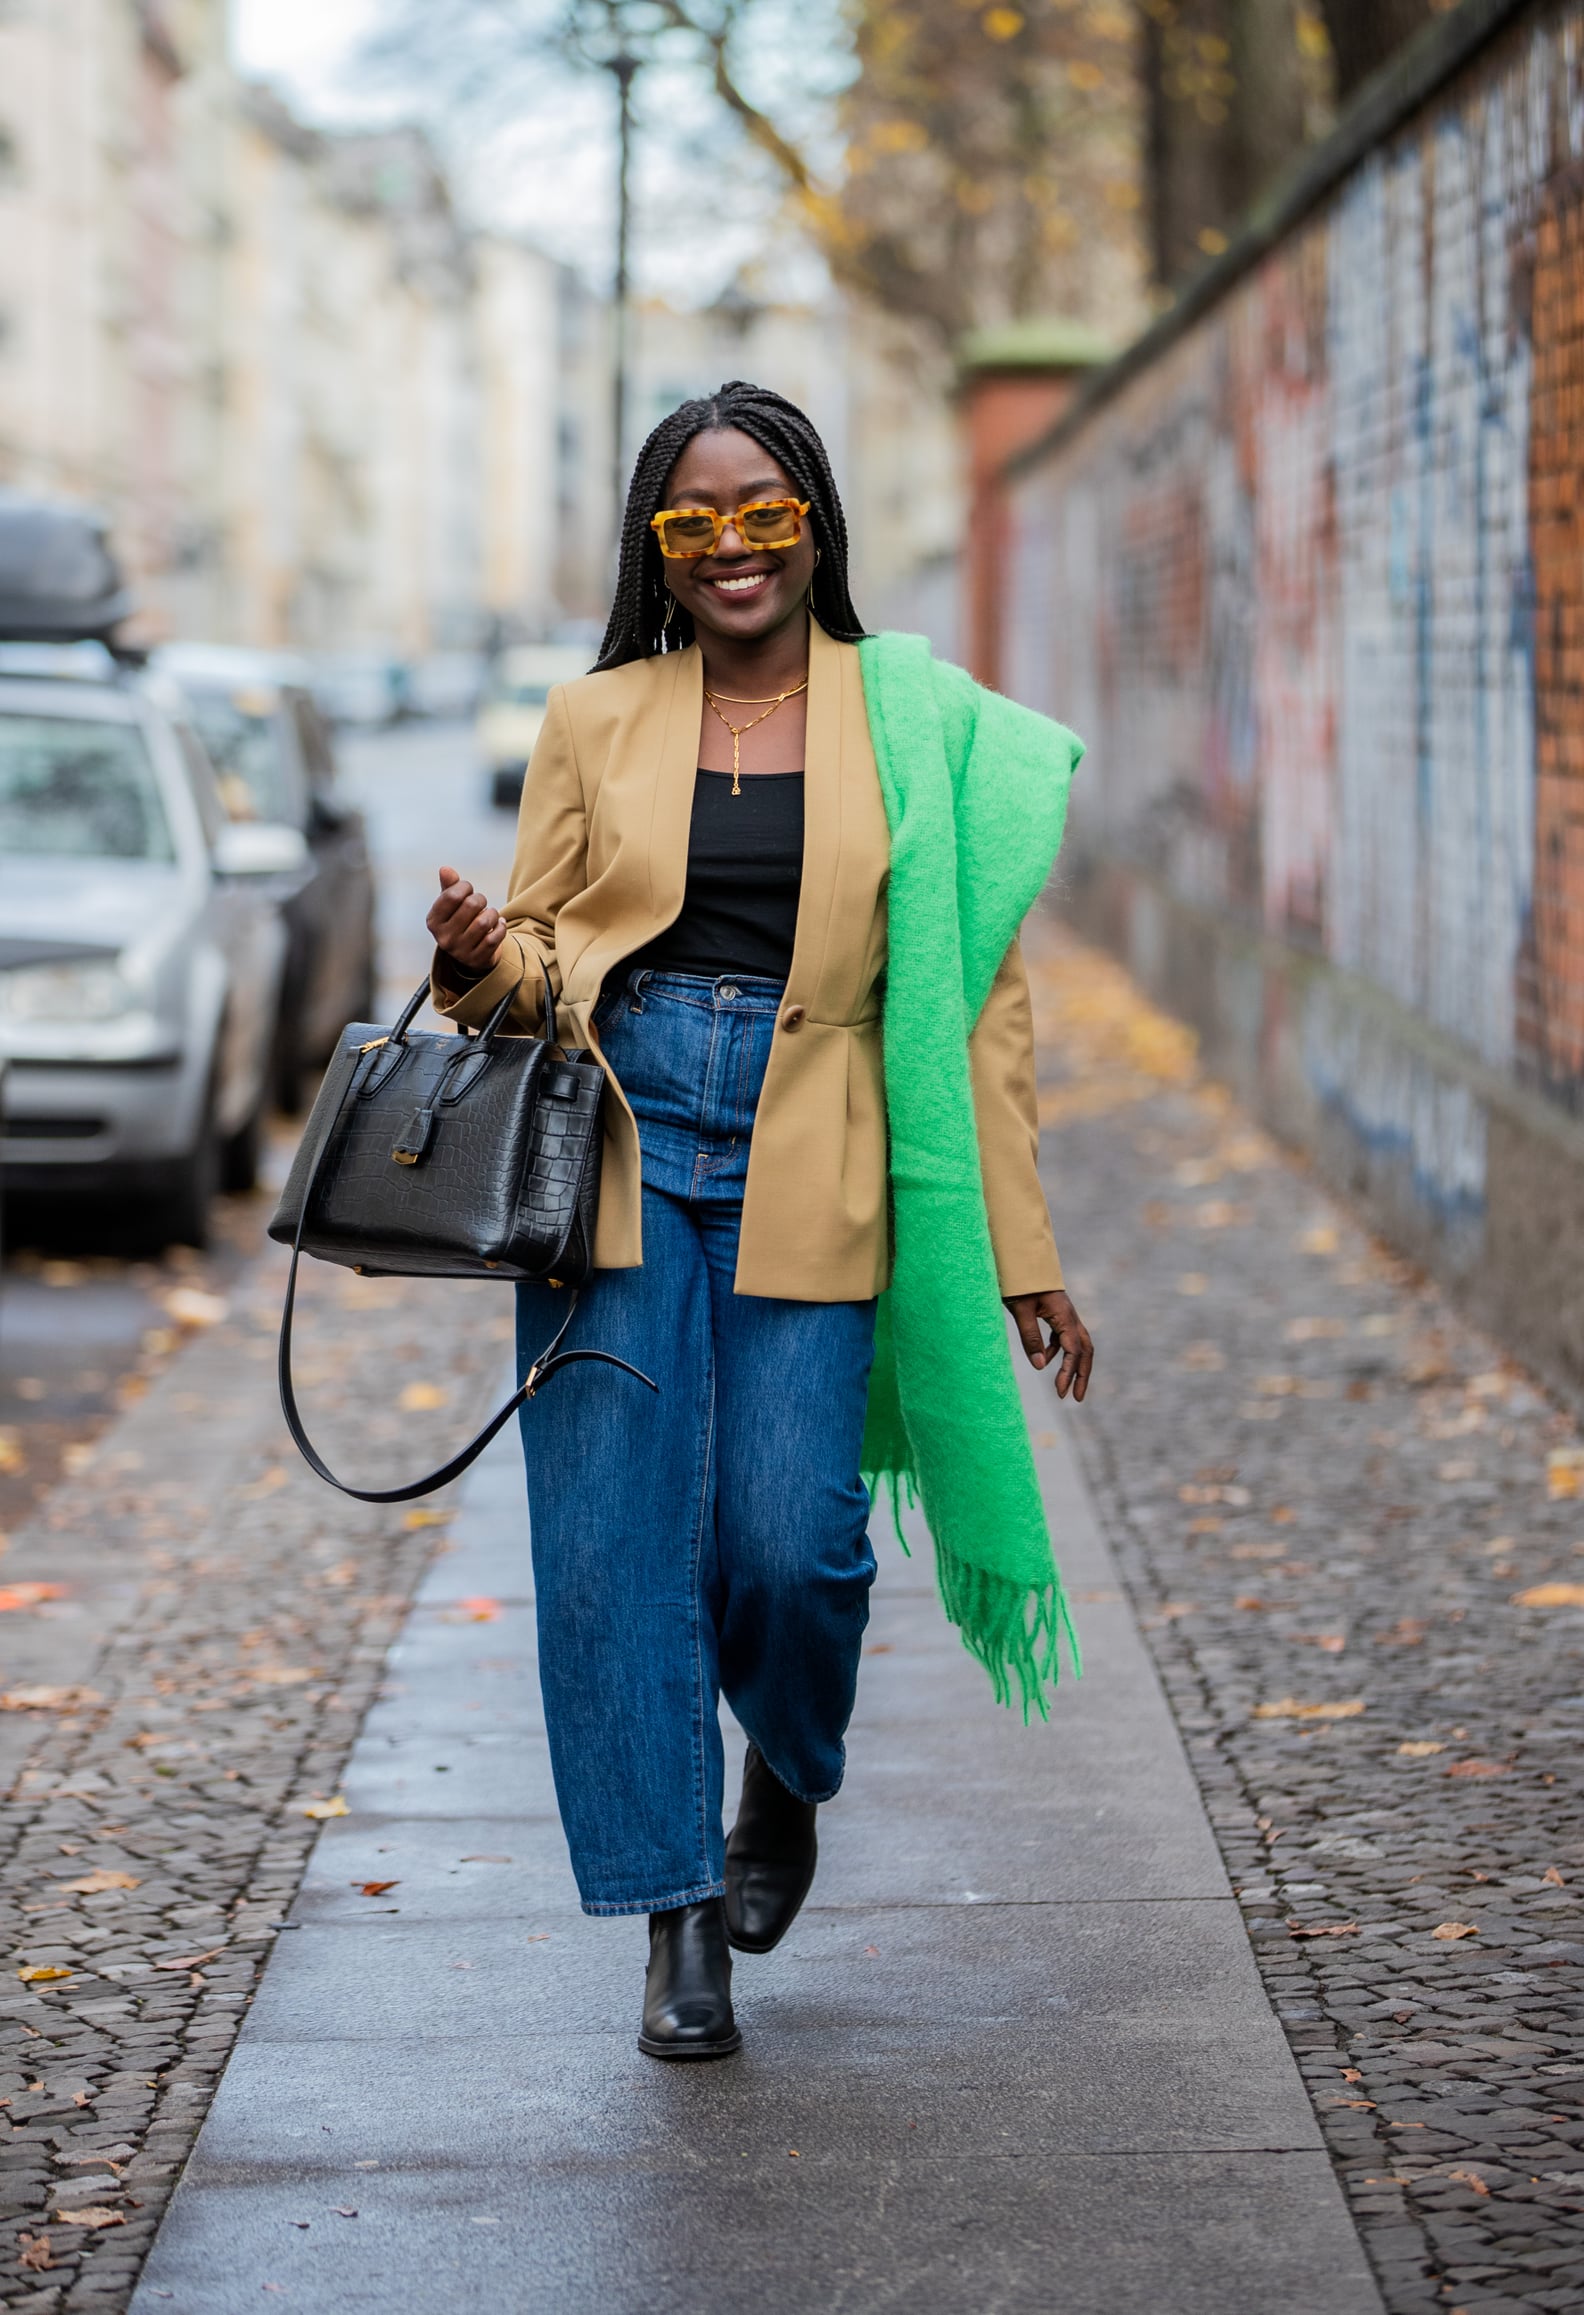 70+ Winter Street Style Looks to Inspire Your Outfits | POPSUGAR Fashion